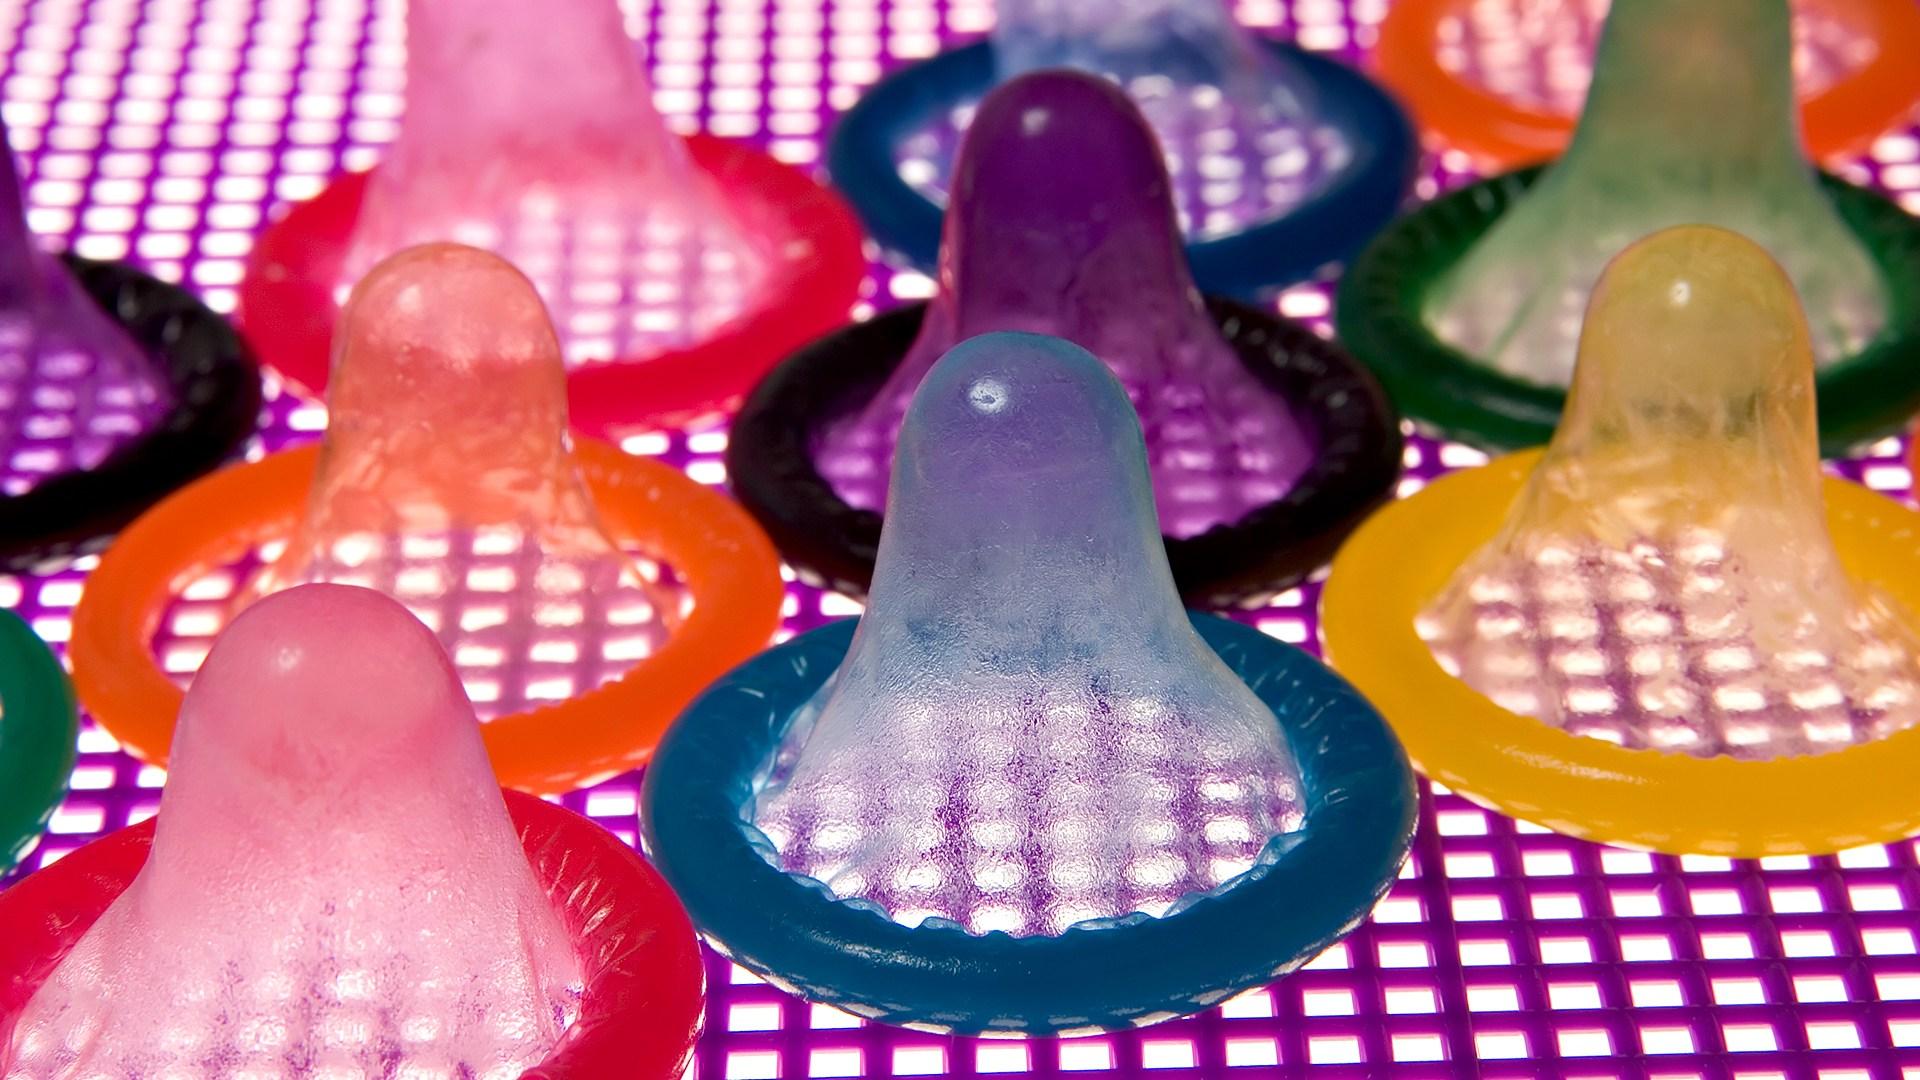 Condom prices increased by 22%, but Condom companies unhappy, want